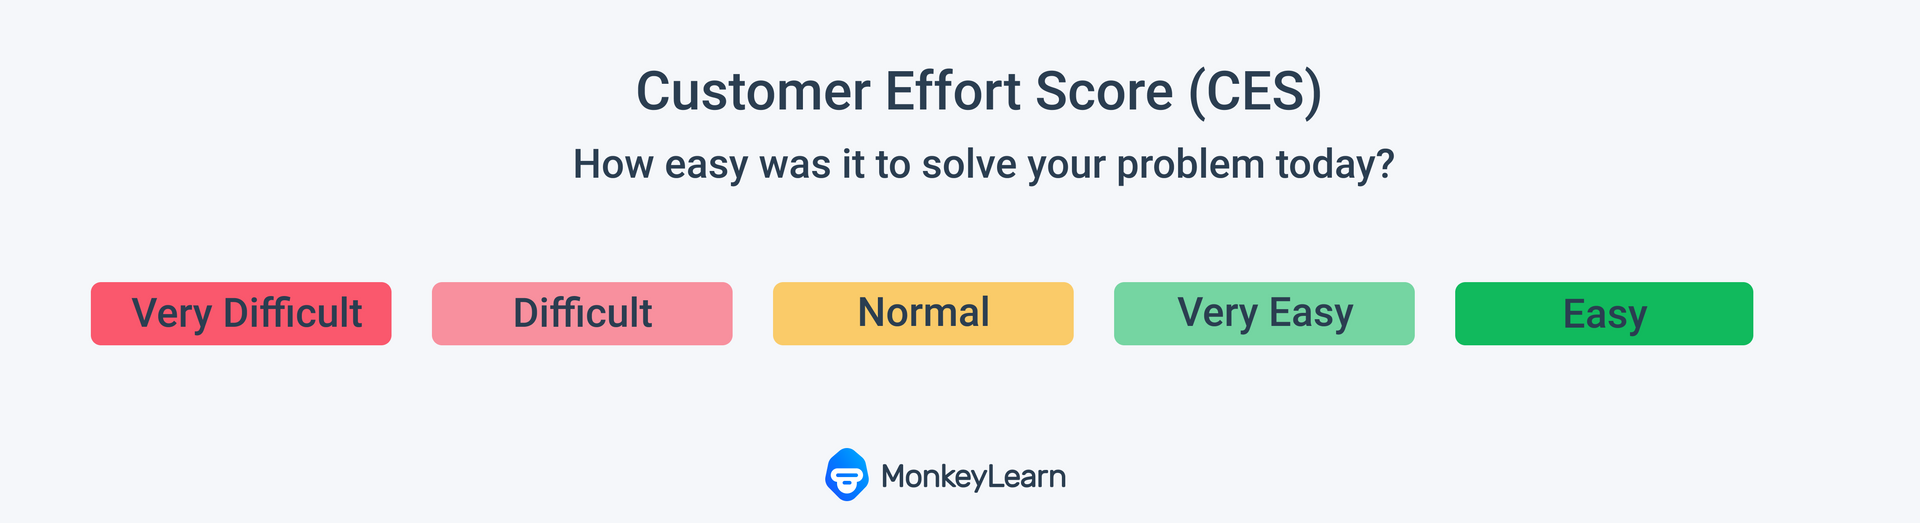 CES question asking how easy was it to solve your problem today. Featuring a Likert scale with the options 'very easy', 'easy', 'normal', 'difficult' and 'very difficult'.